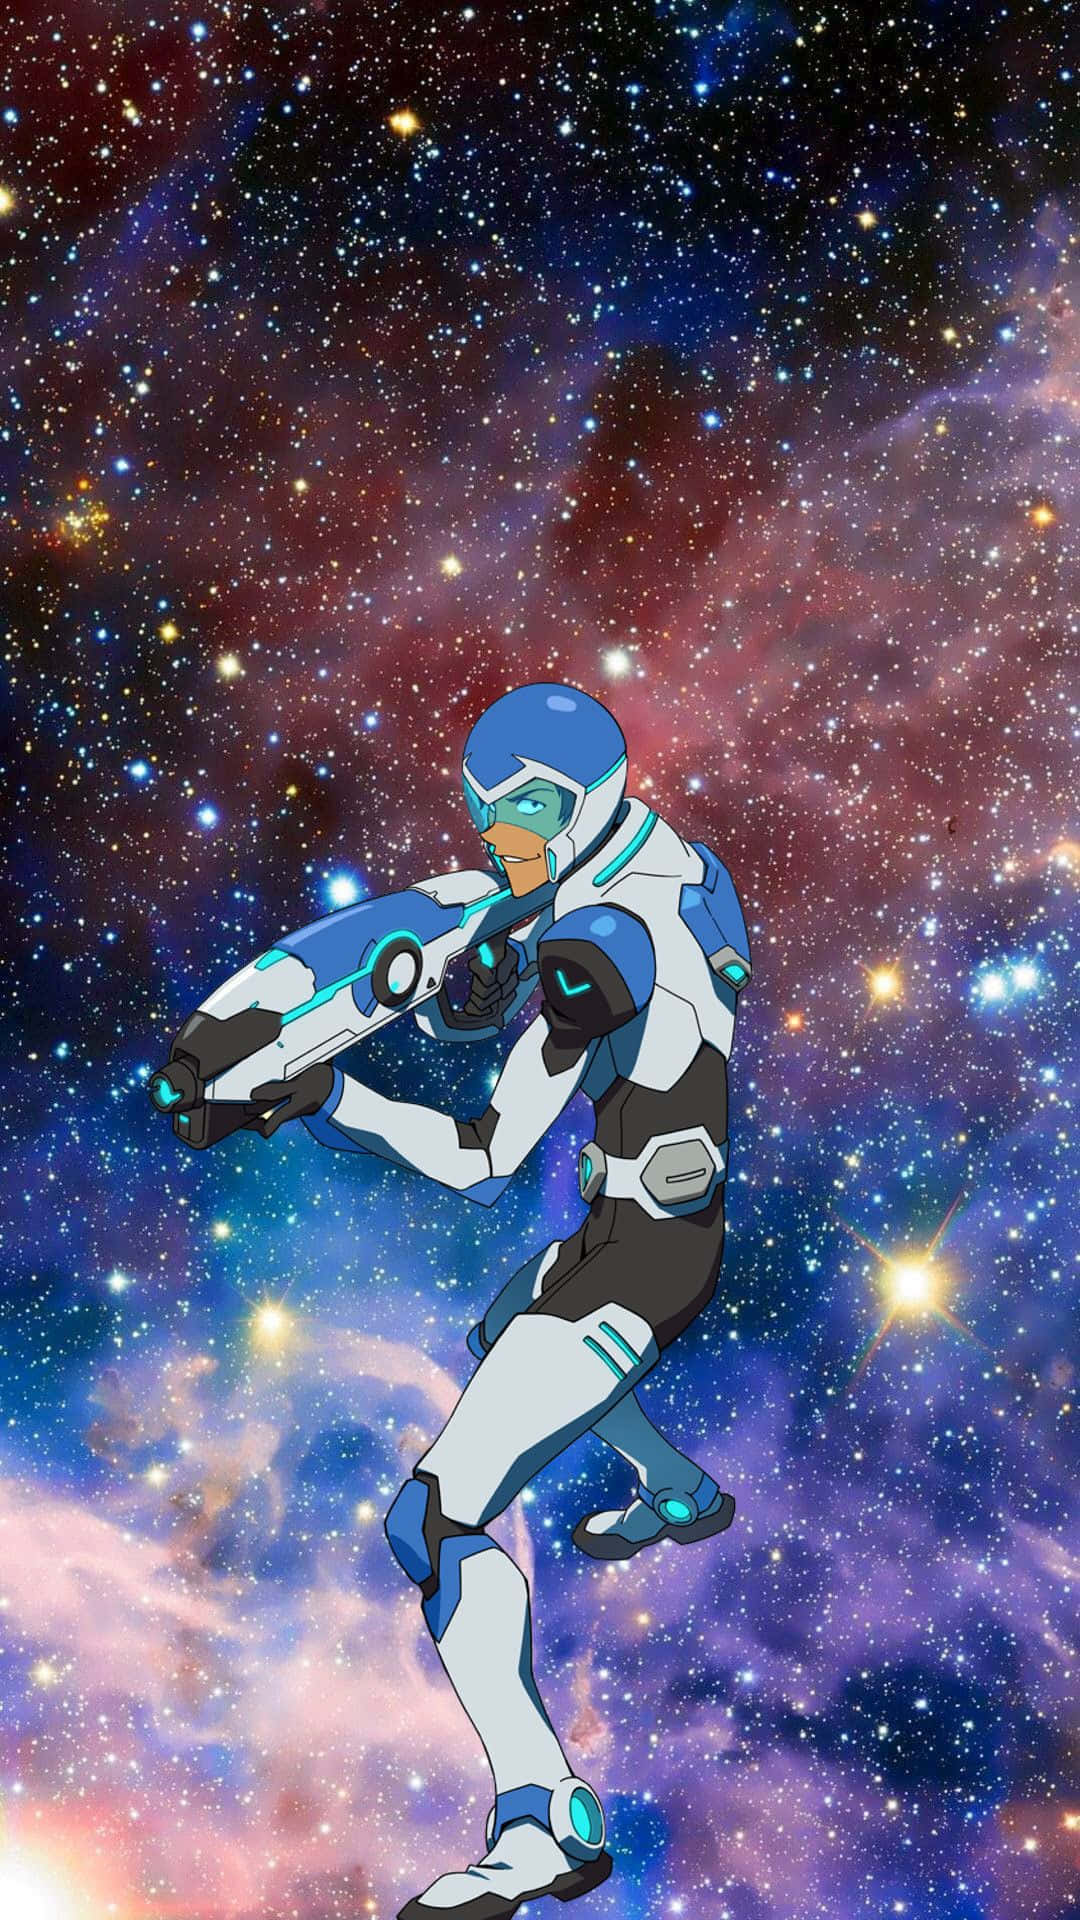 Voltronanime Lance Moody Would Be Translated To 